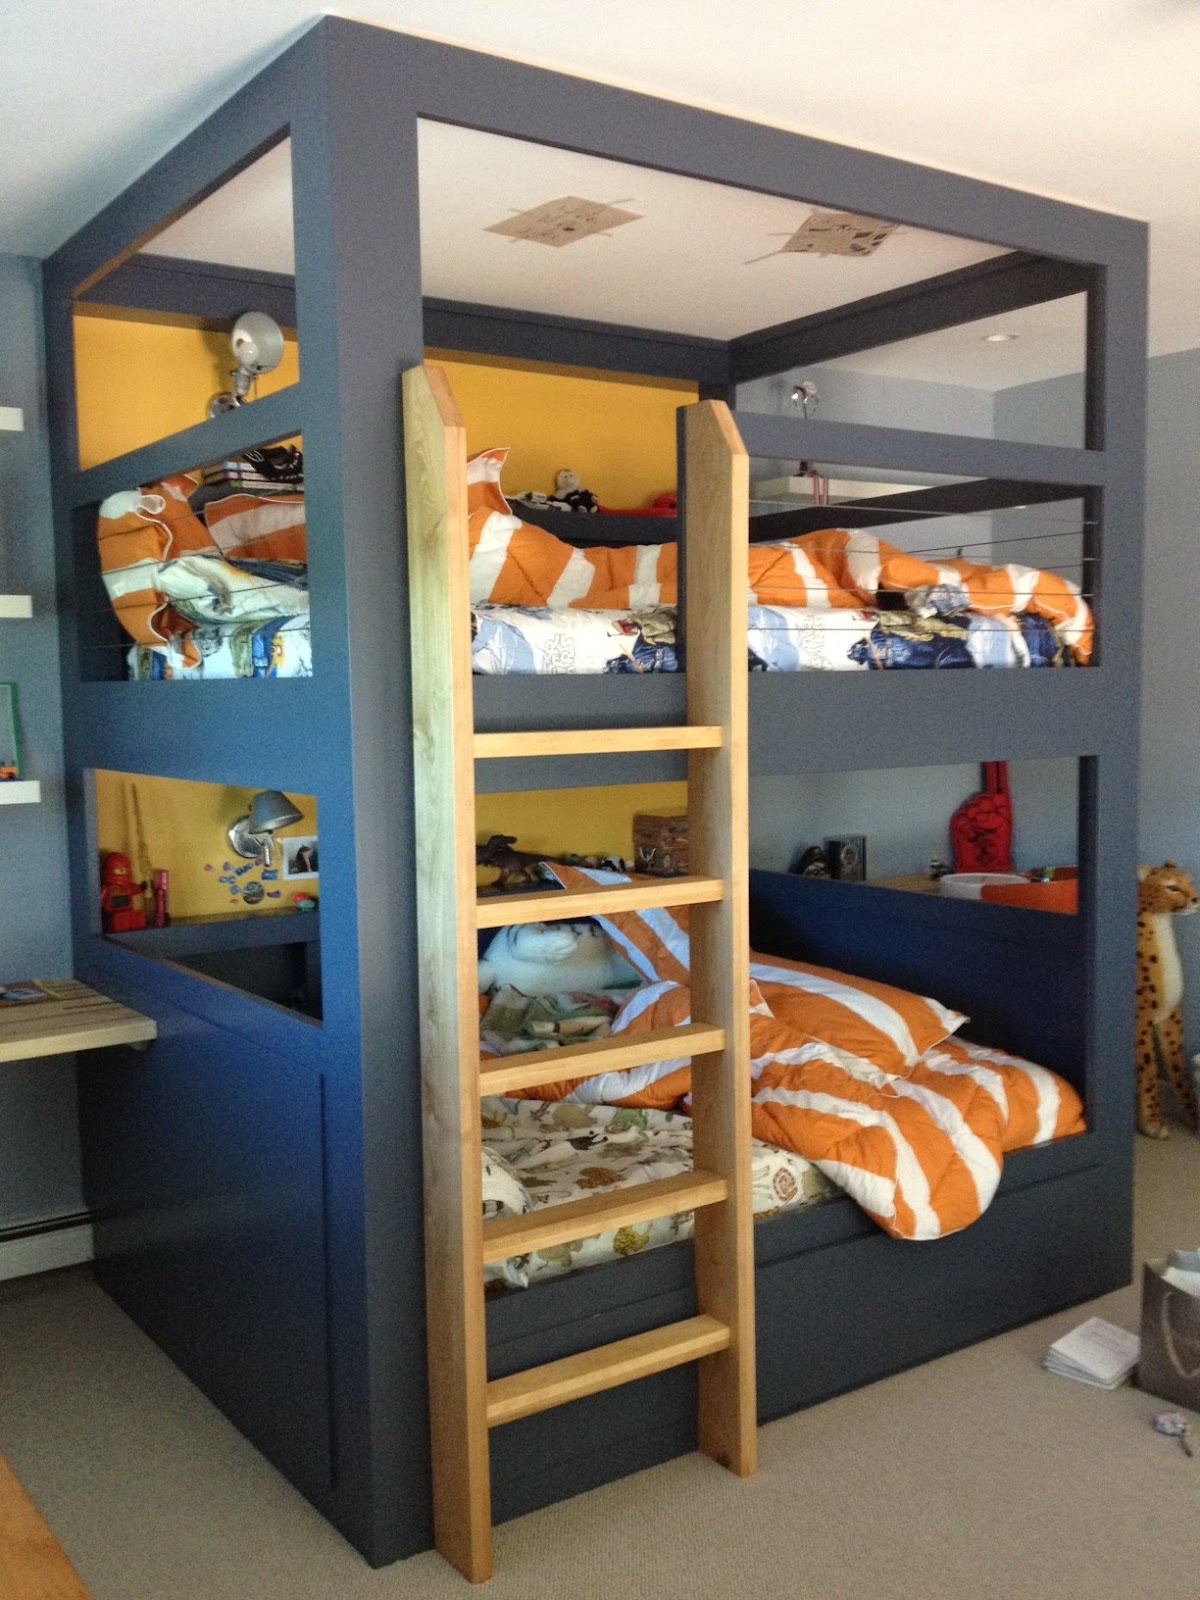 built in bunk bed dimensions